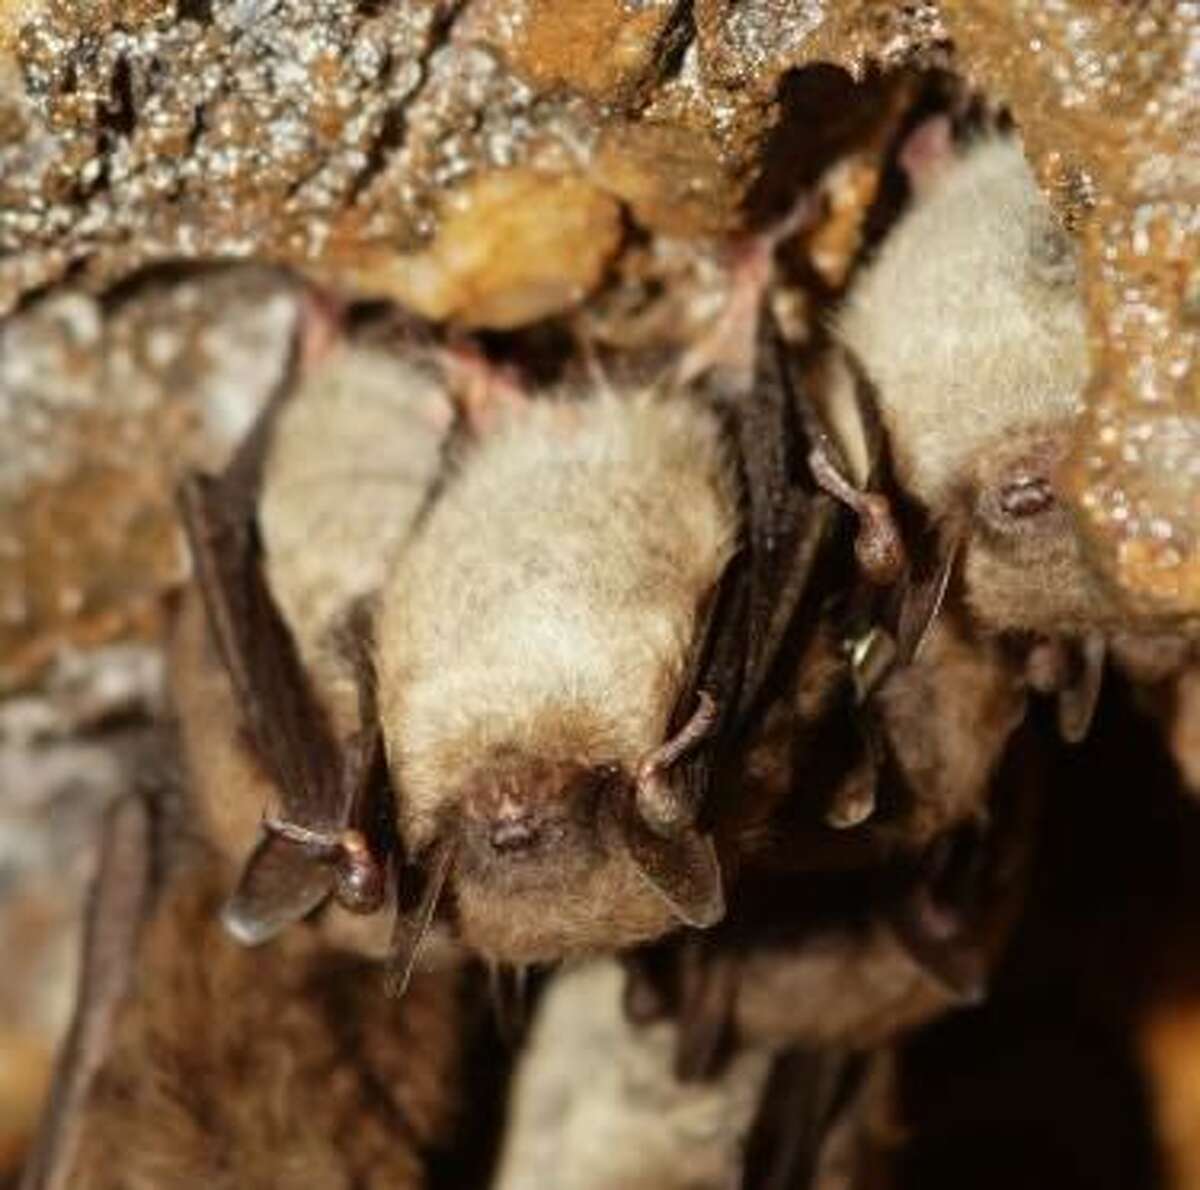 Little brown bats, recently listed as endangered on Connecticut’s List of Endangered, Threatened and Special Concern Species.